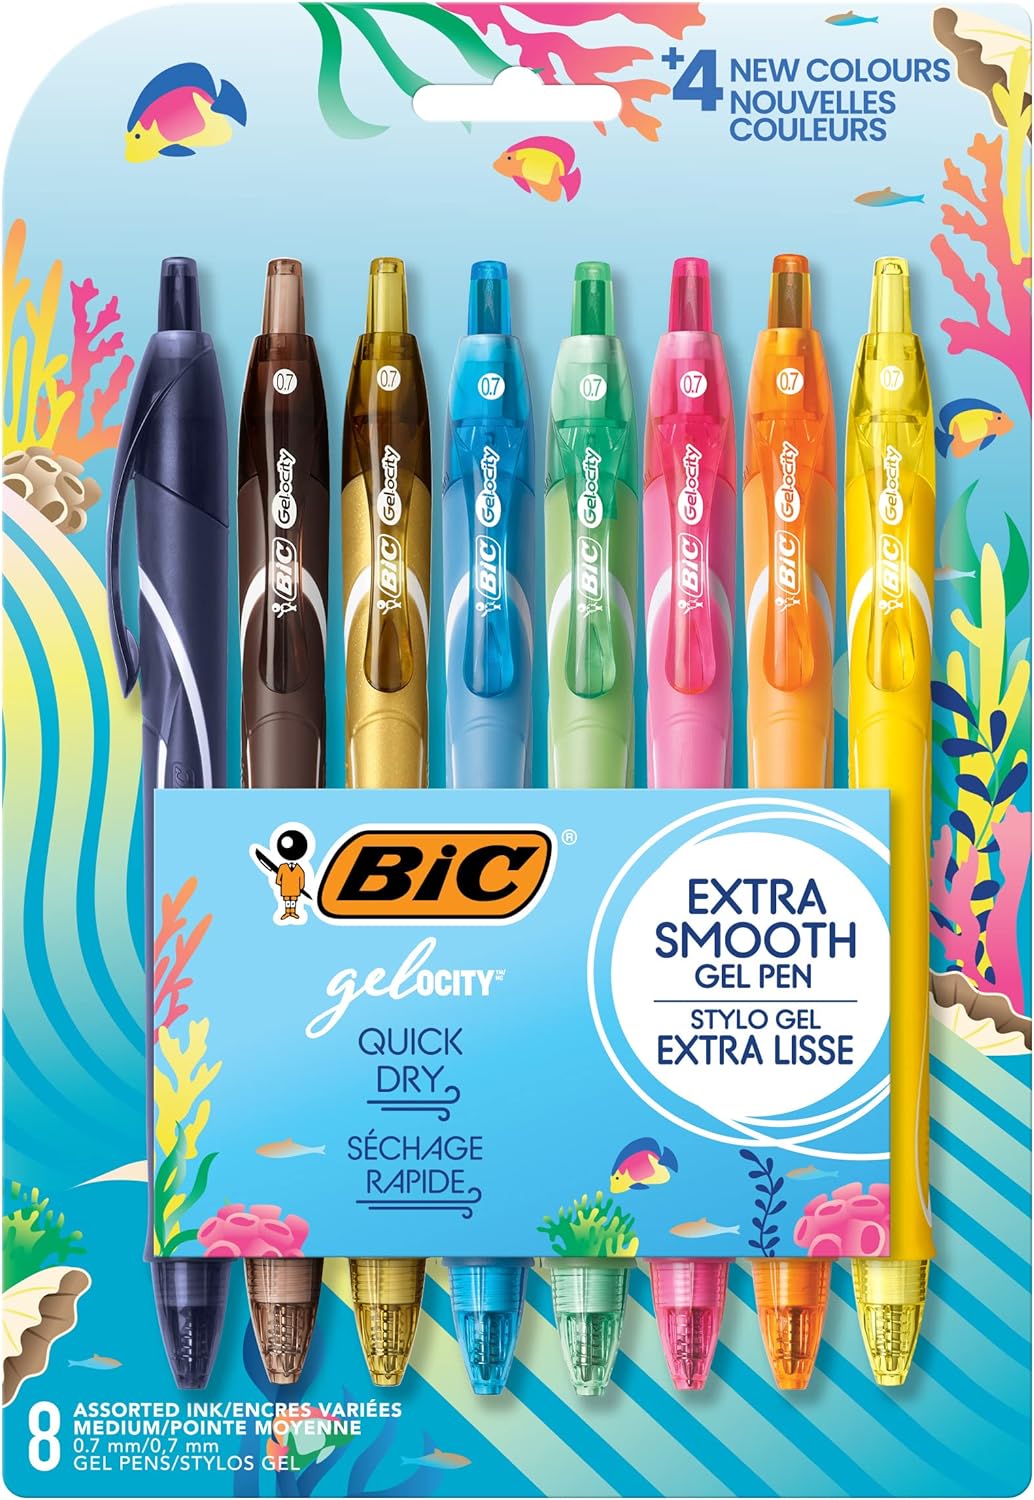 BIC Gel-ocity Quick Dry Fashion Gel Pens (RGLCGAP8-AST), Medium 0.7mm, Assorted Colors, Retractable Gel Pens with Comfortable Full Grip, 8-Count Pack